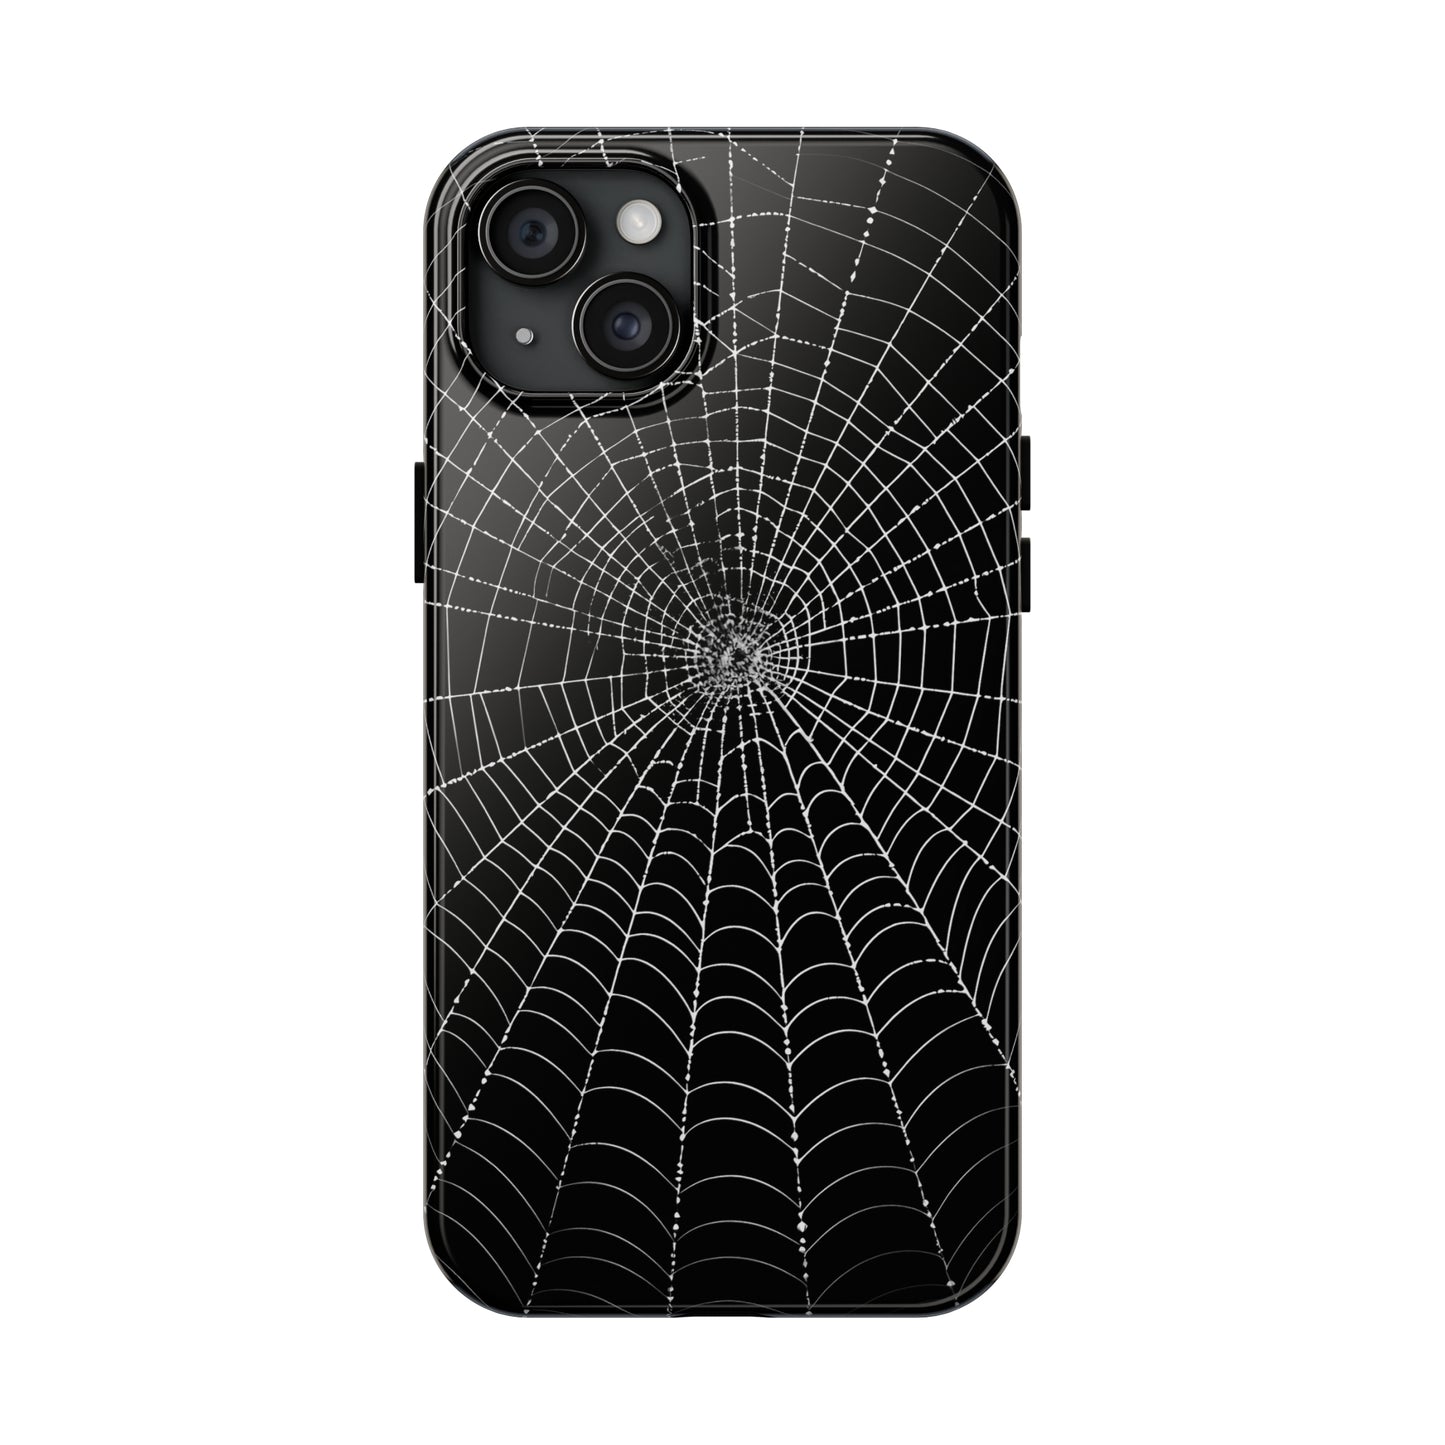 Spider Web 1 - Protective iPhone Cases